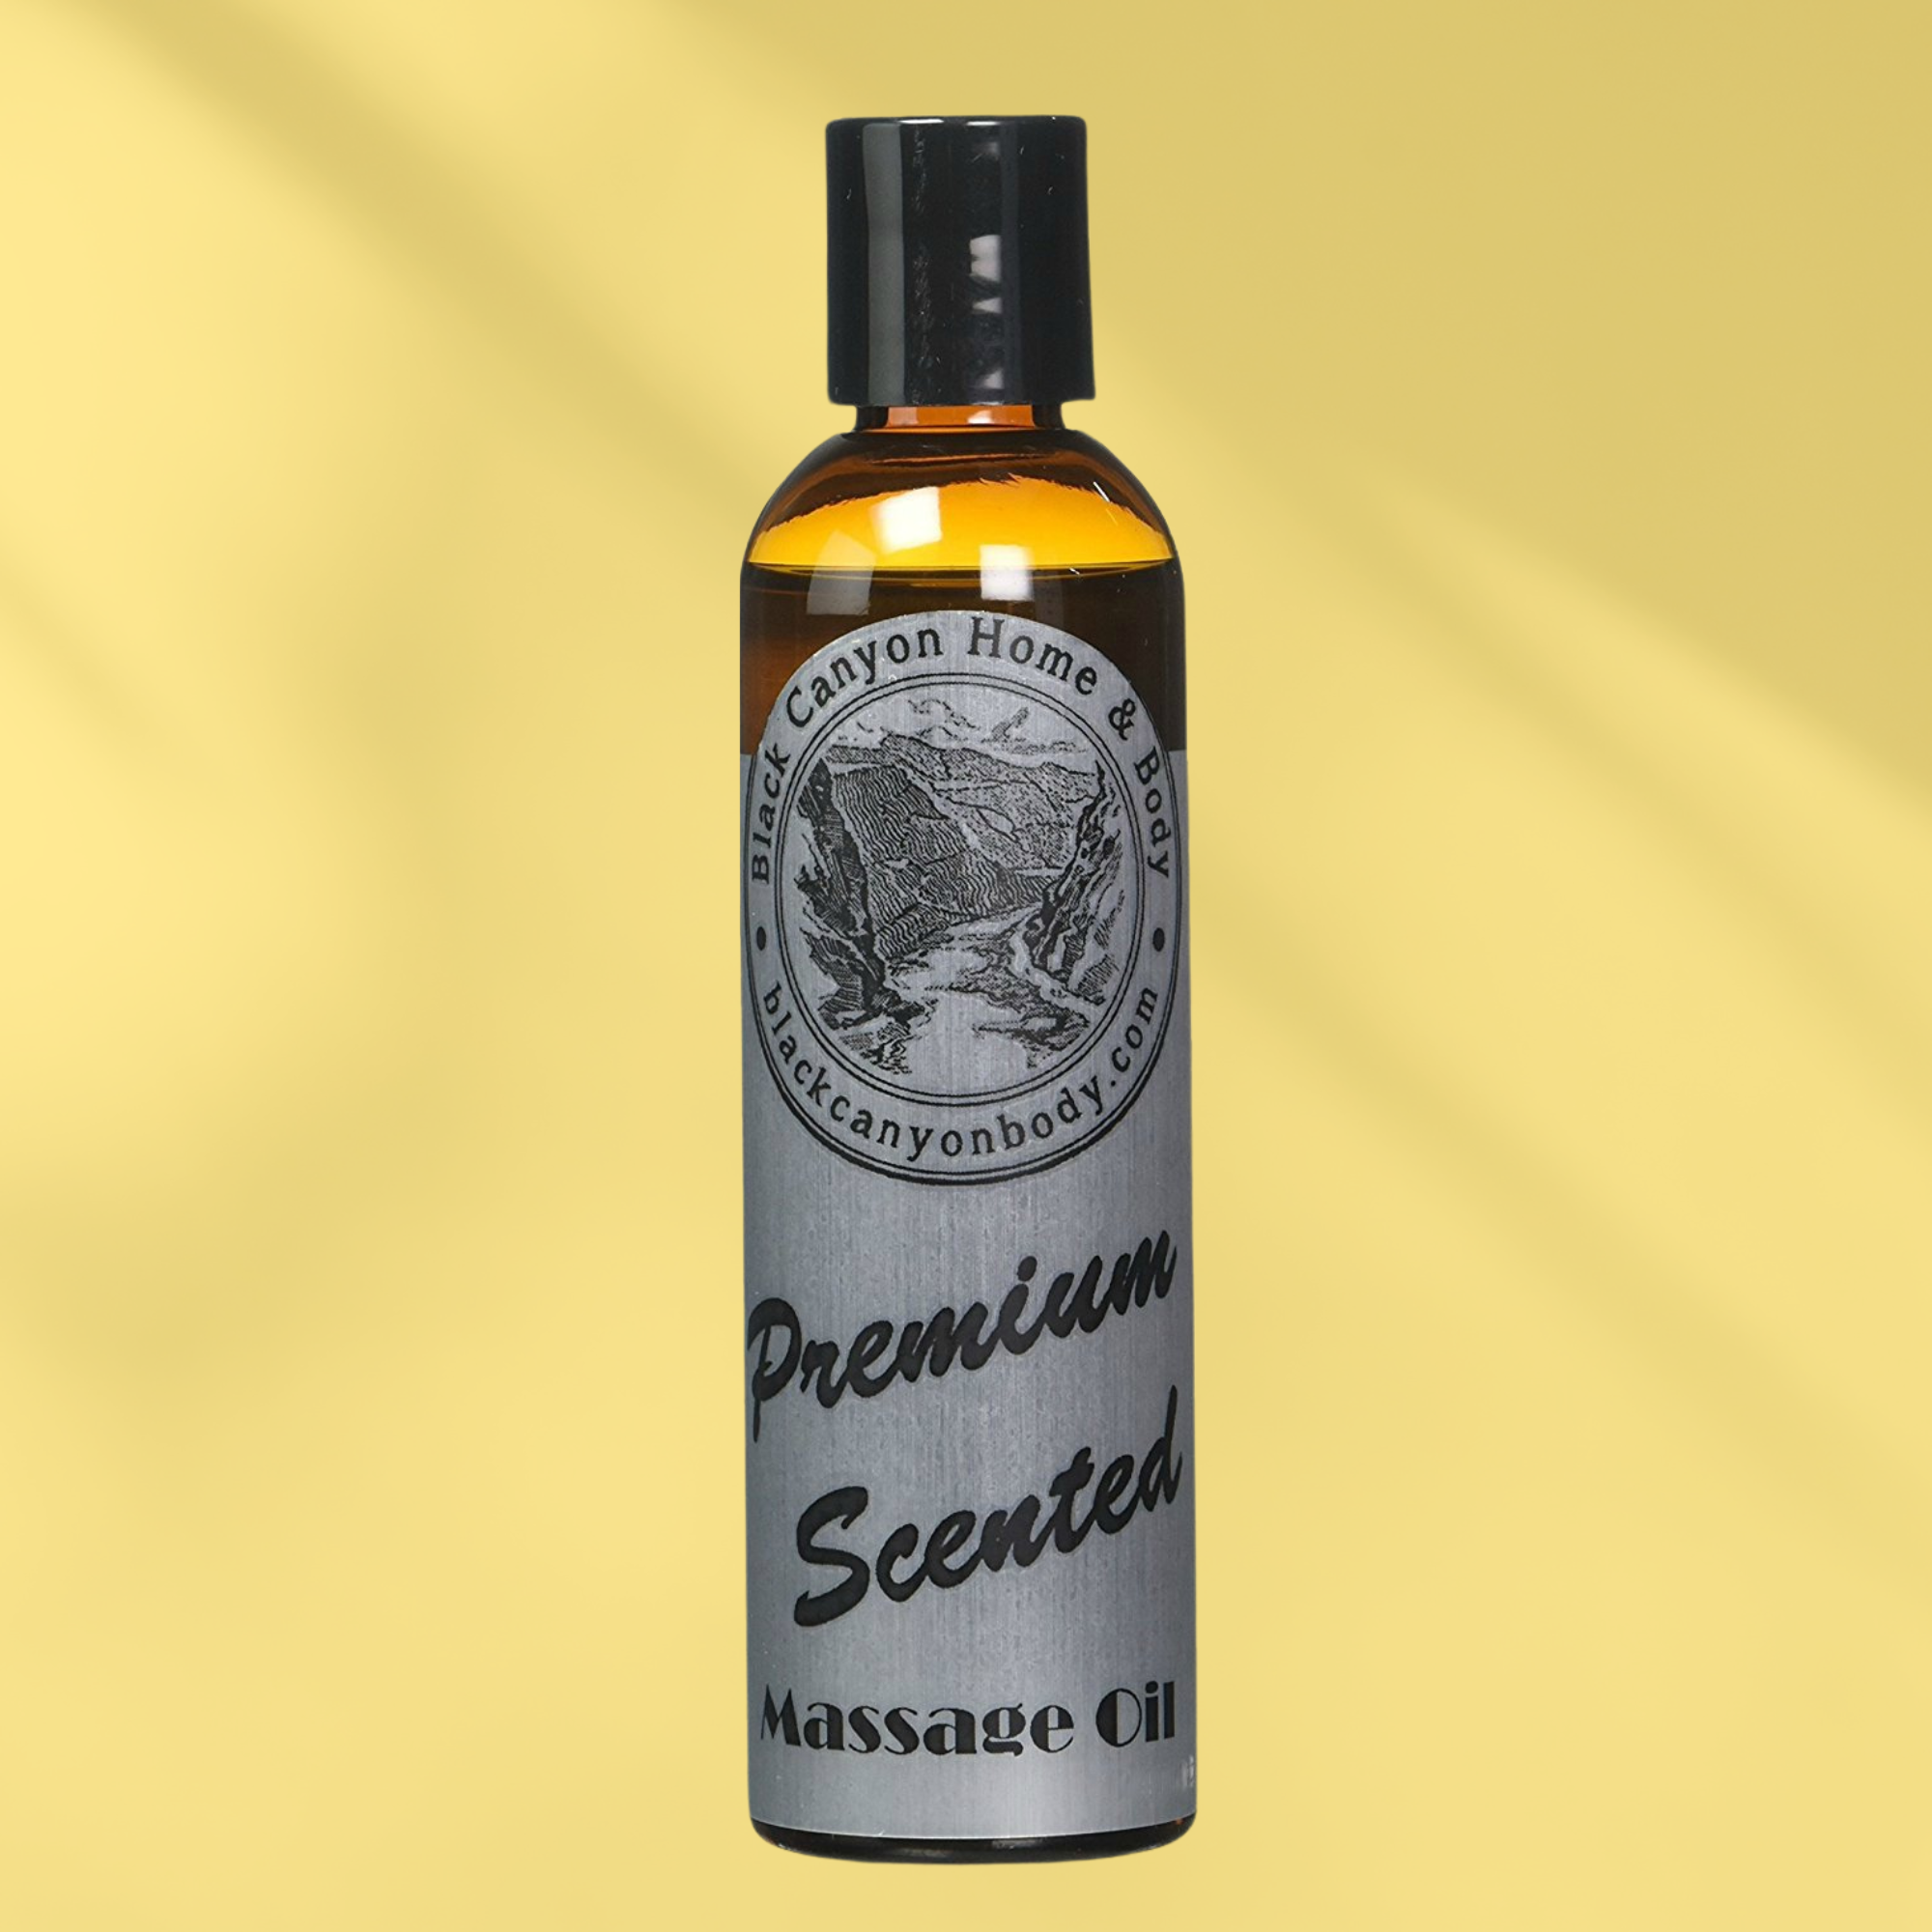 Black Canyon Banana Nut Bread Scented Massage Oil